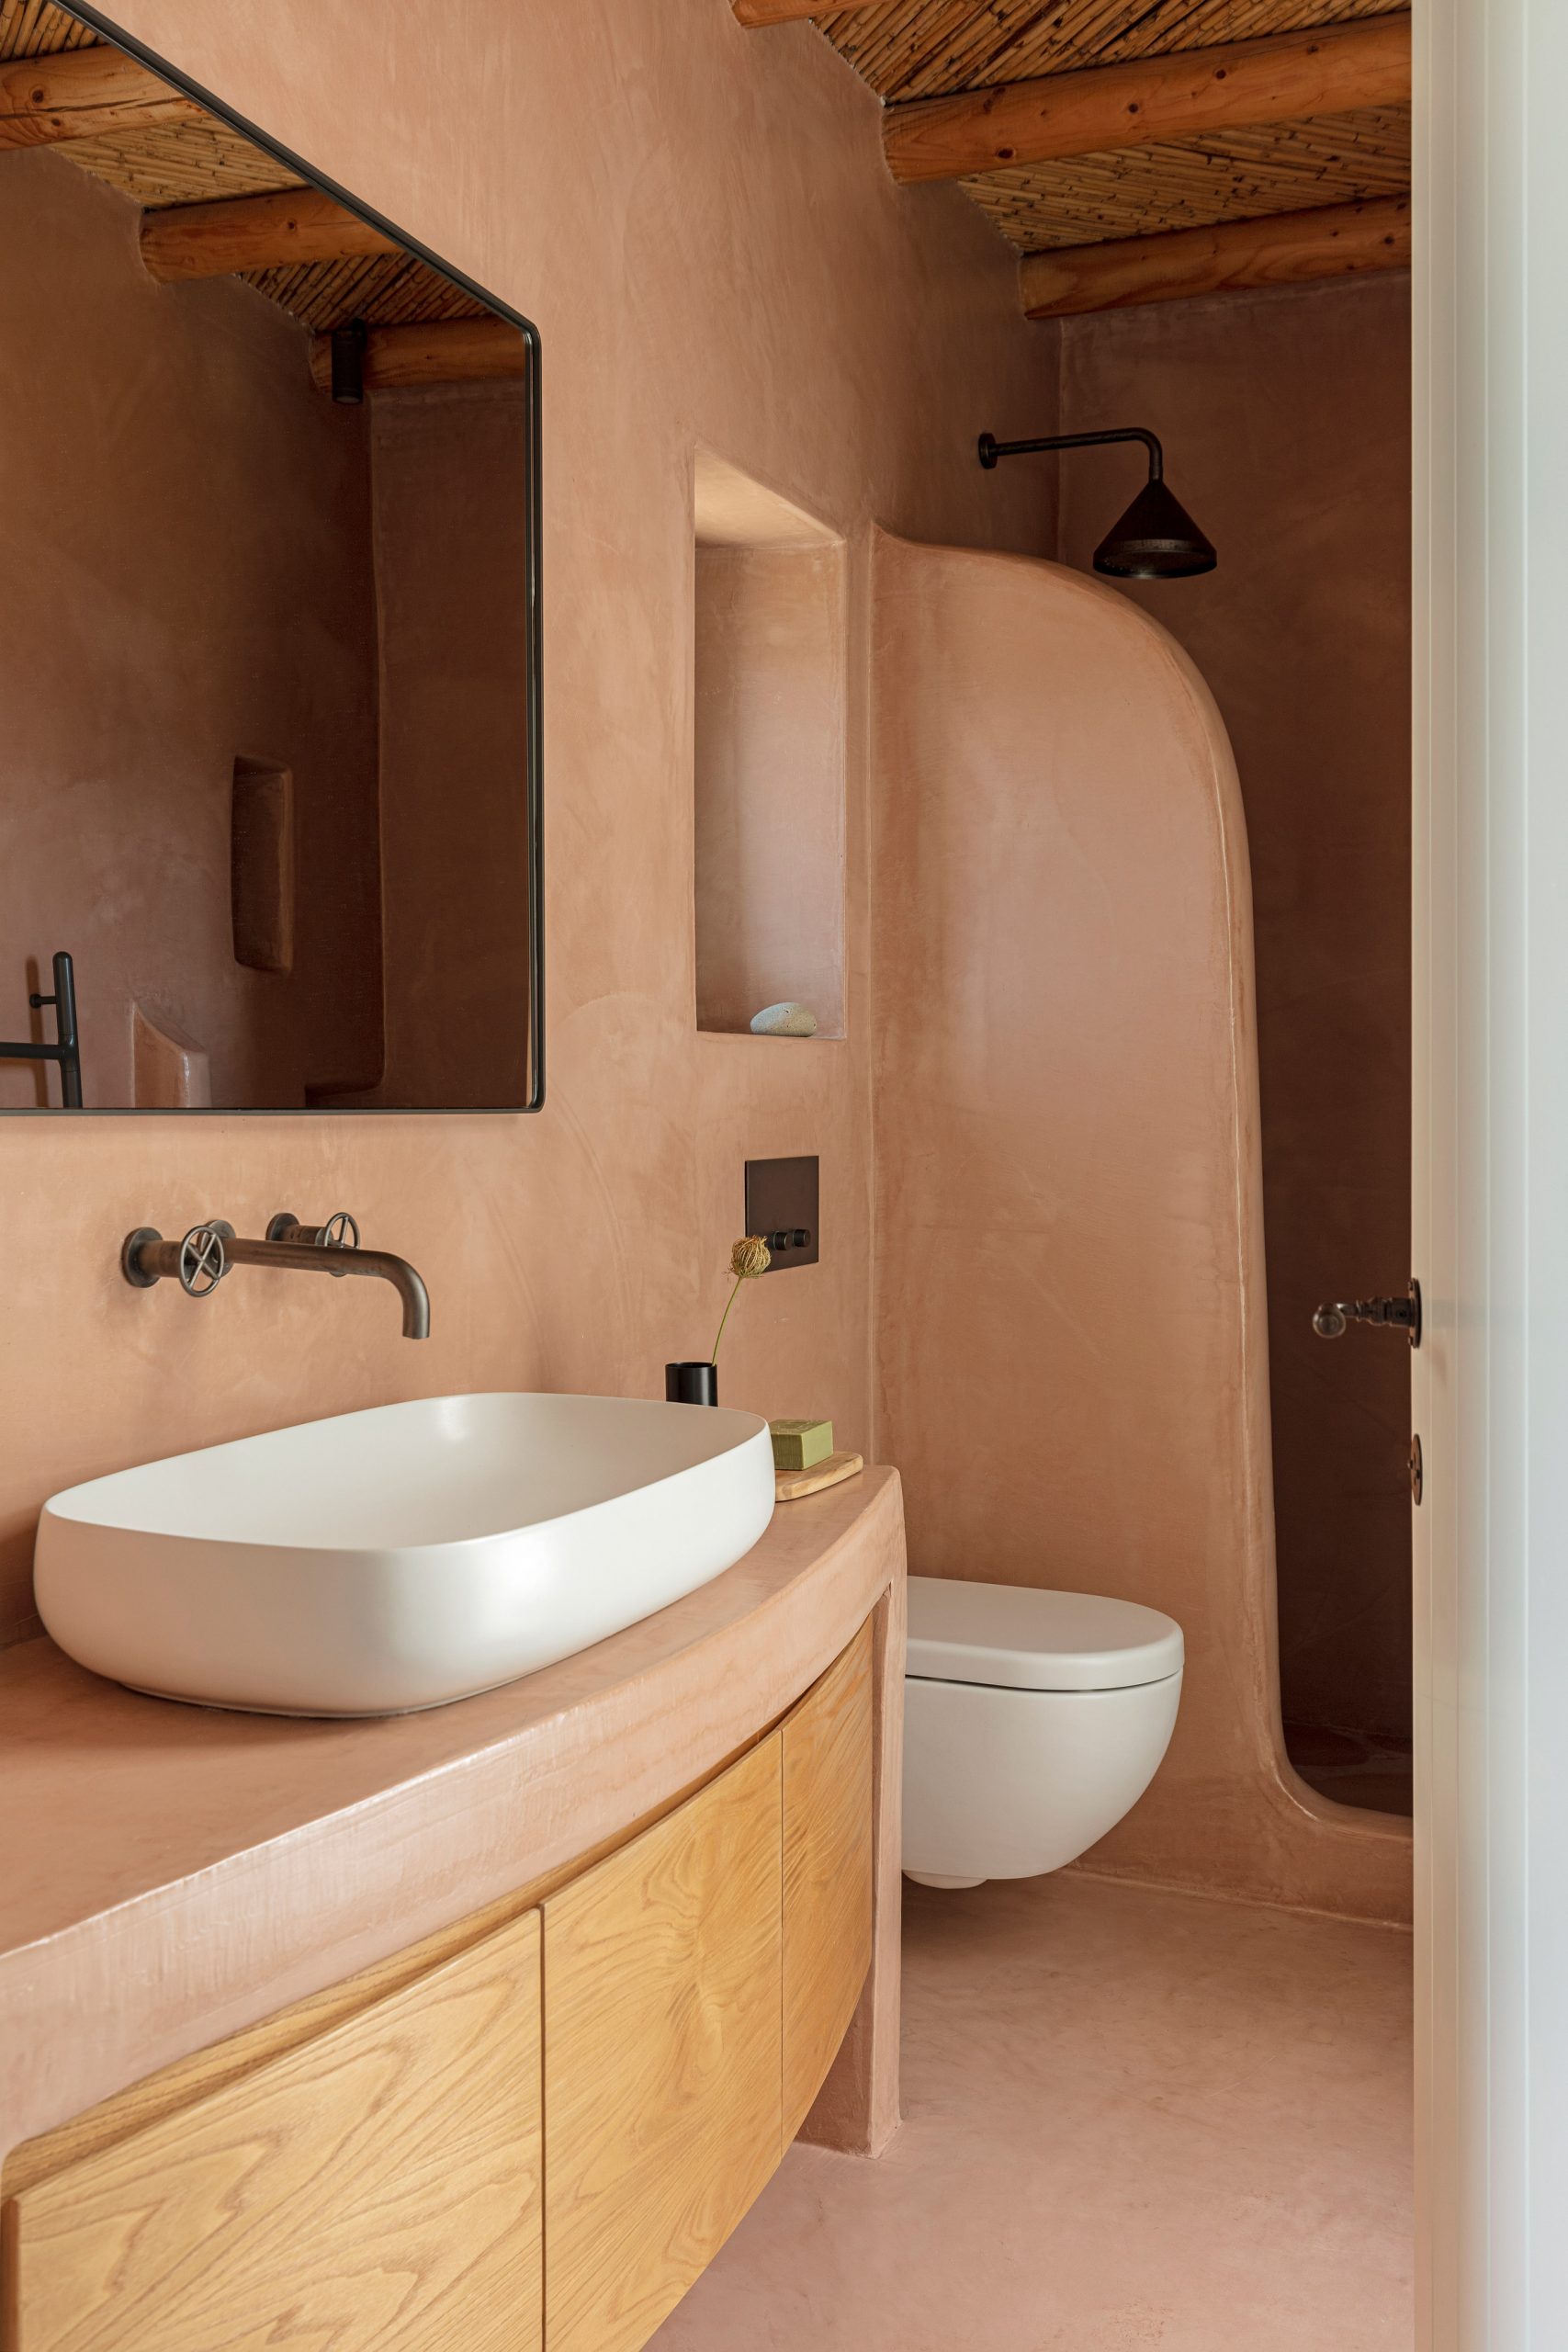 Bathroom in Xerolithi house by Sinas Architects